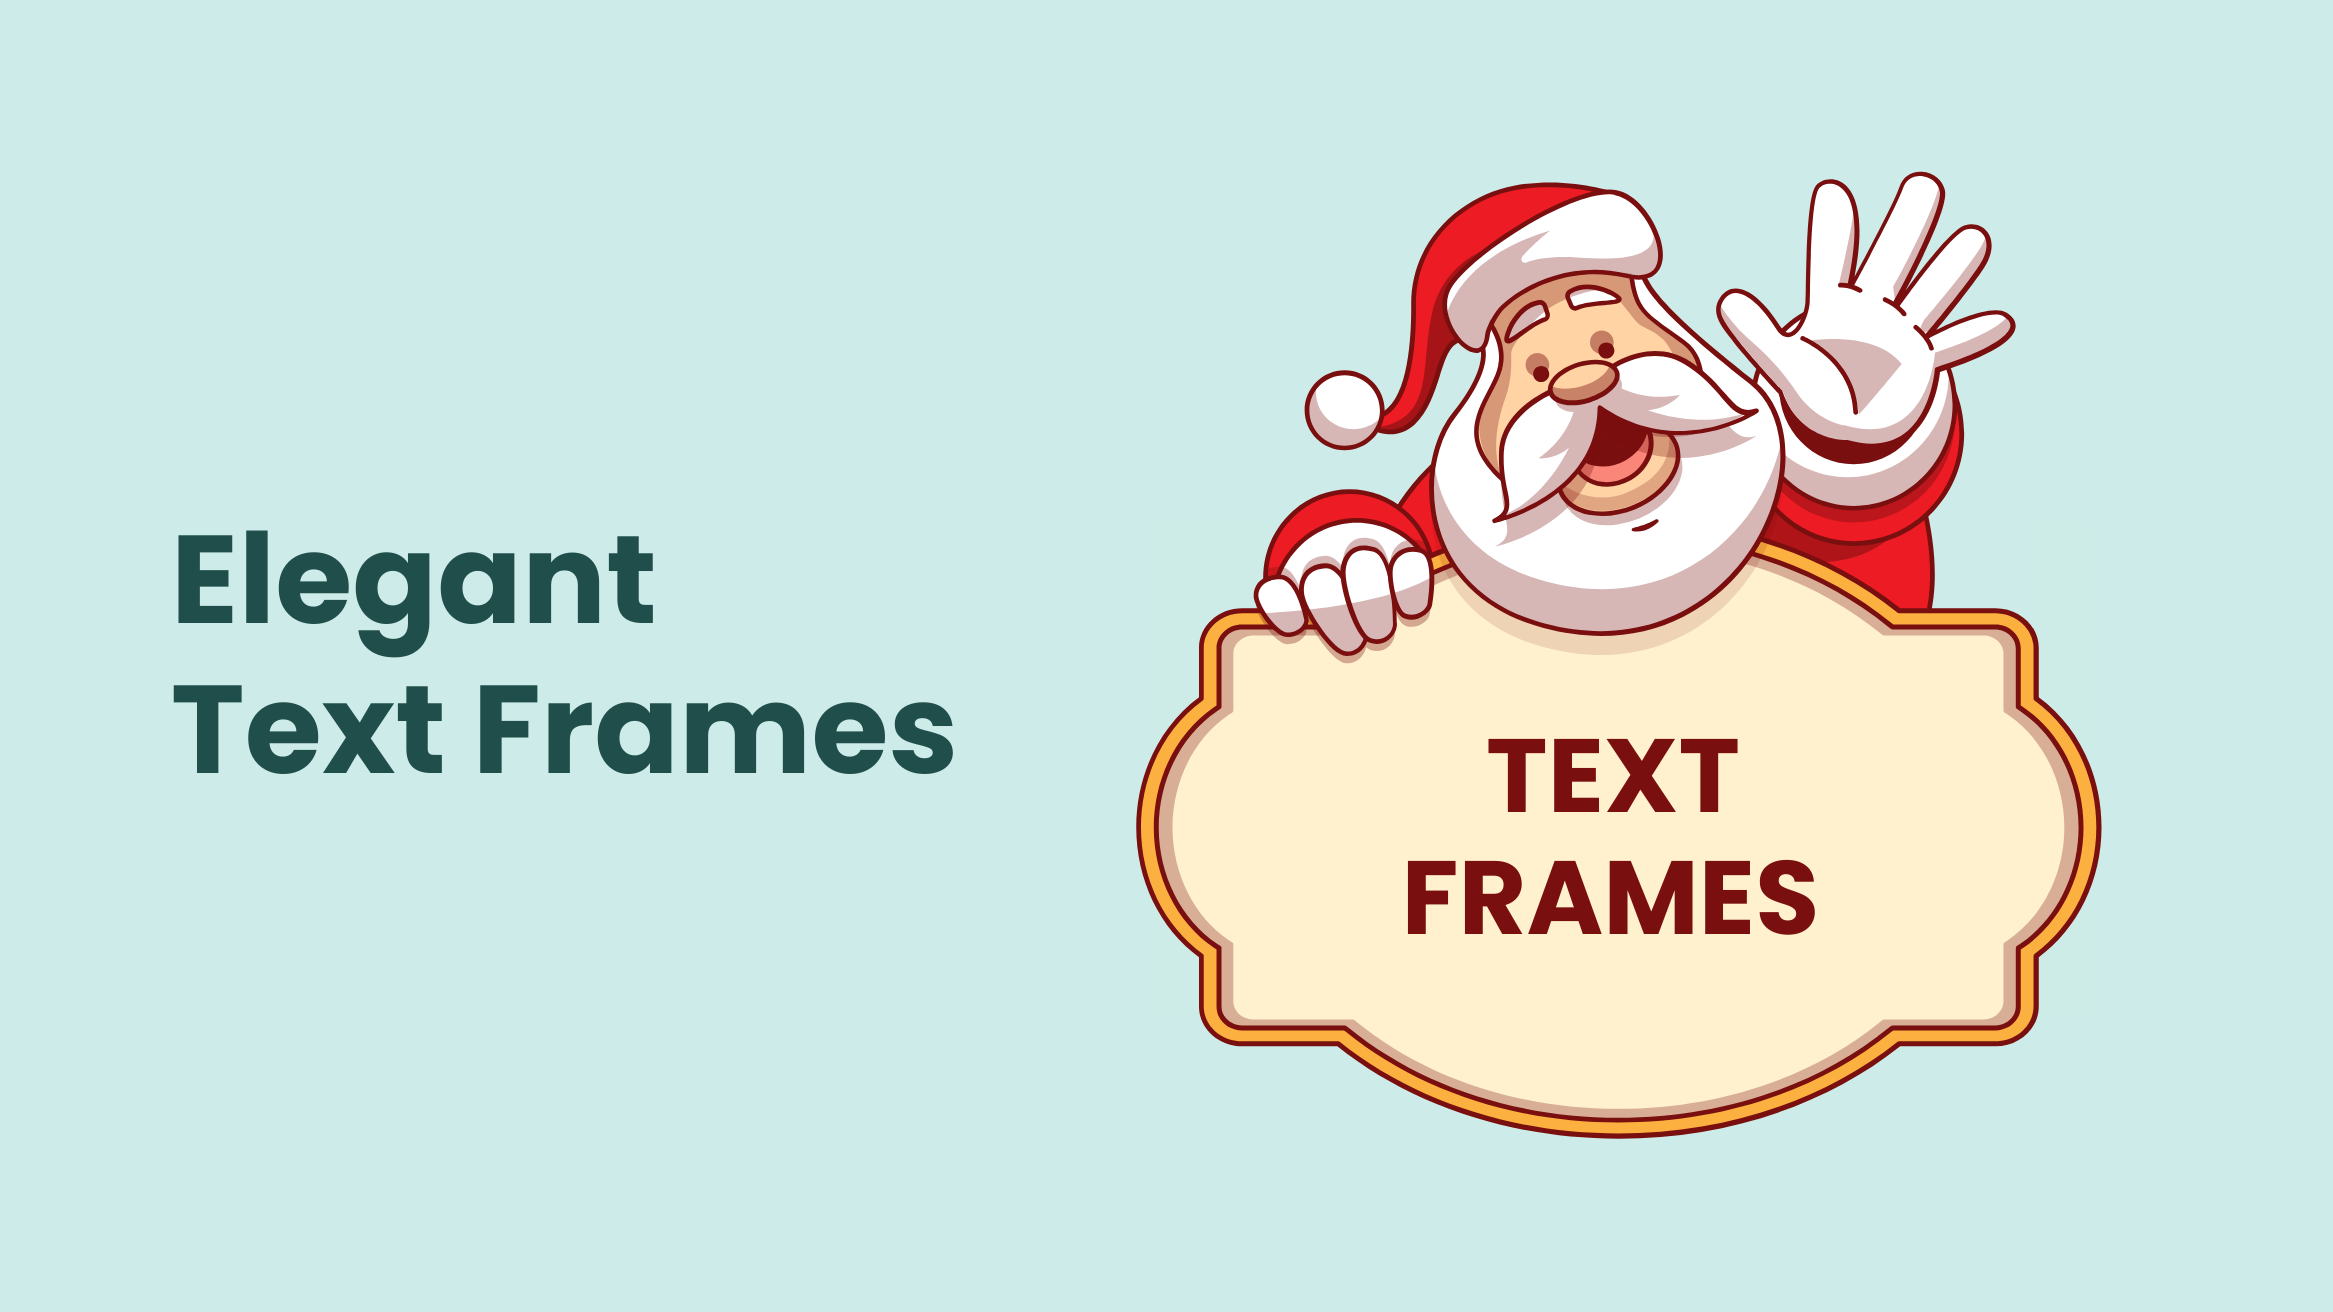 Elegant Text Frames to Use in Multiple Ways